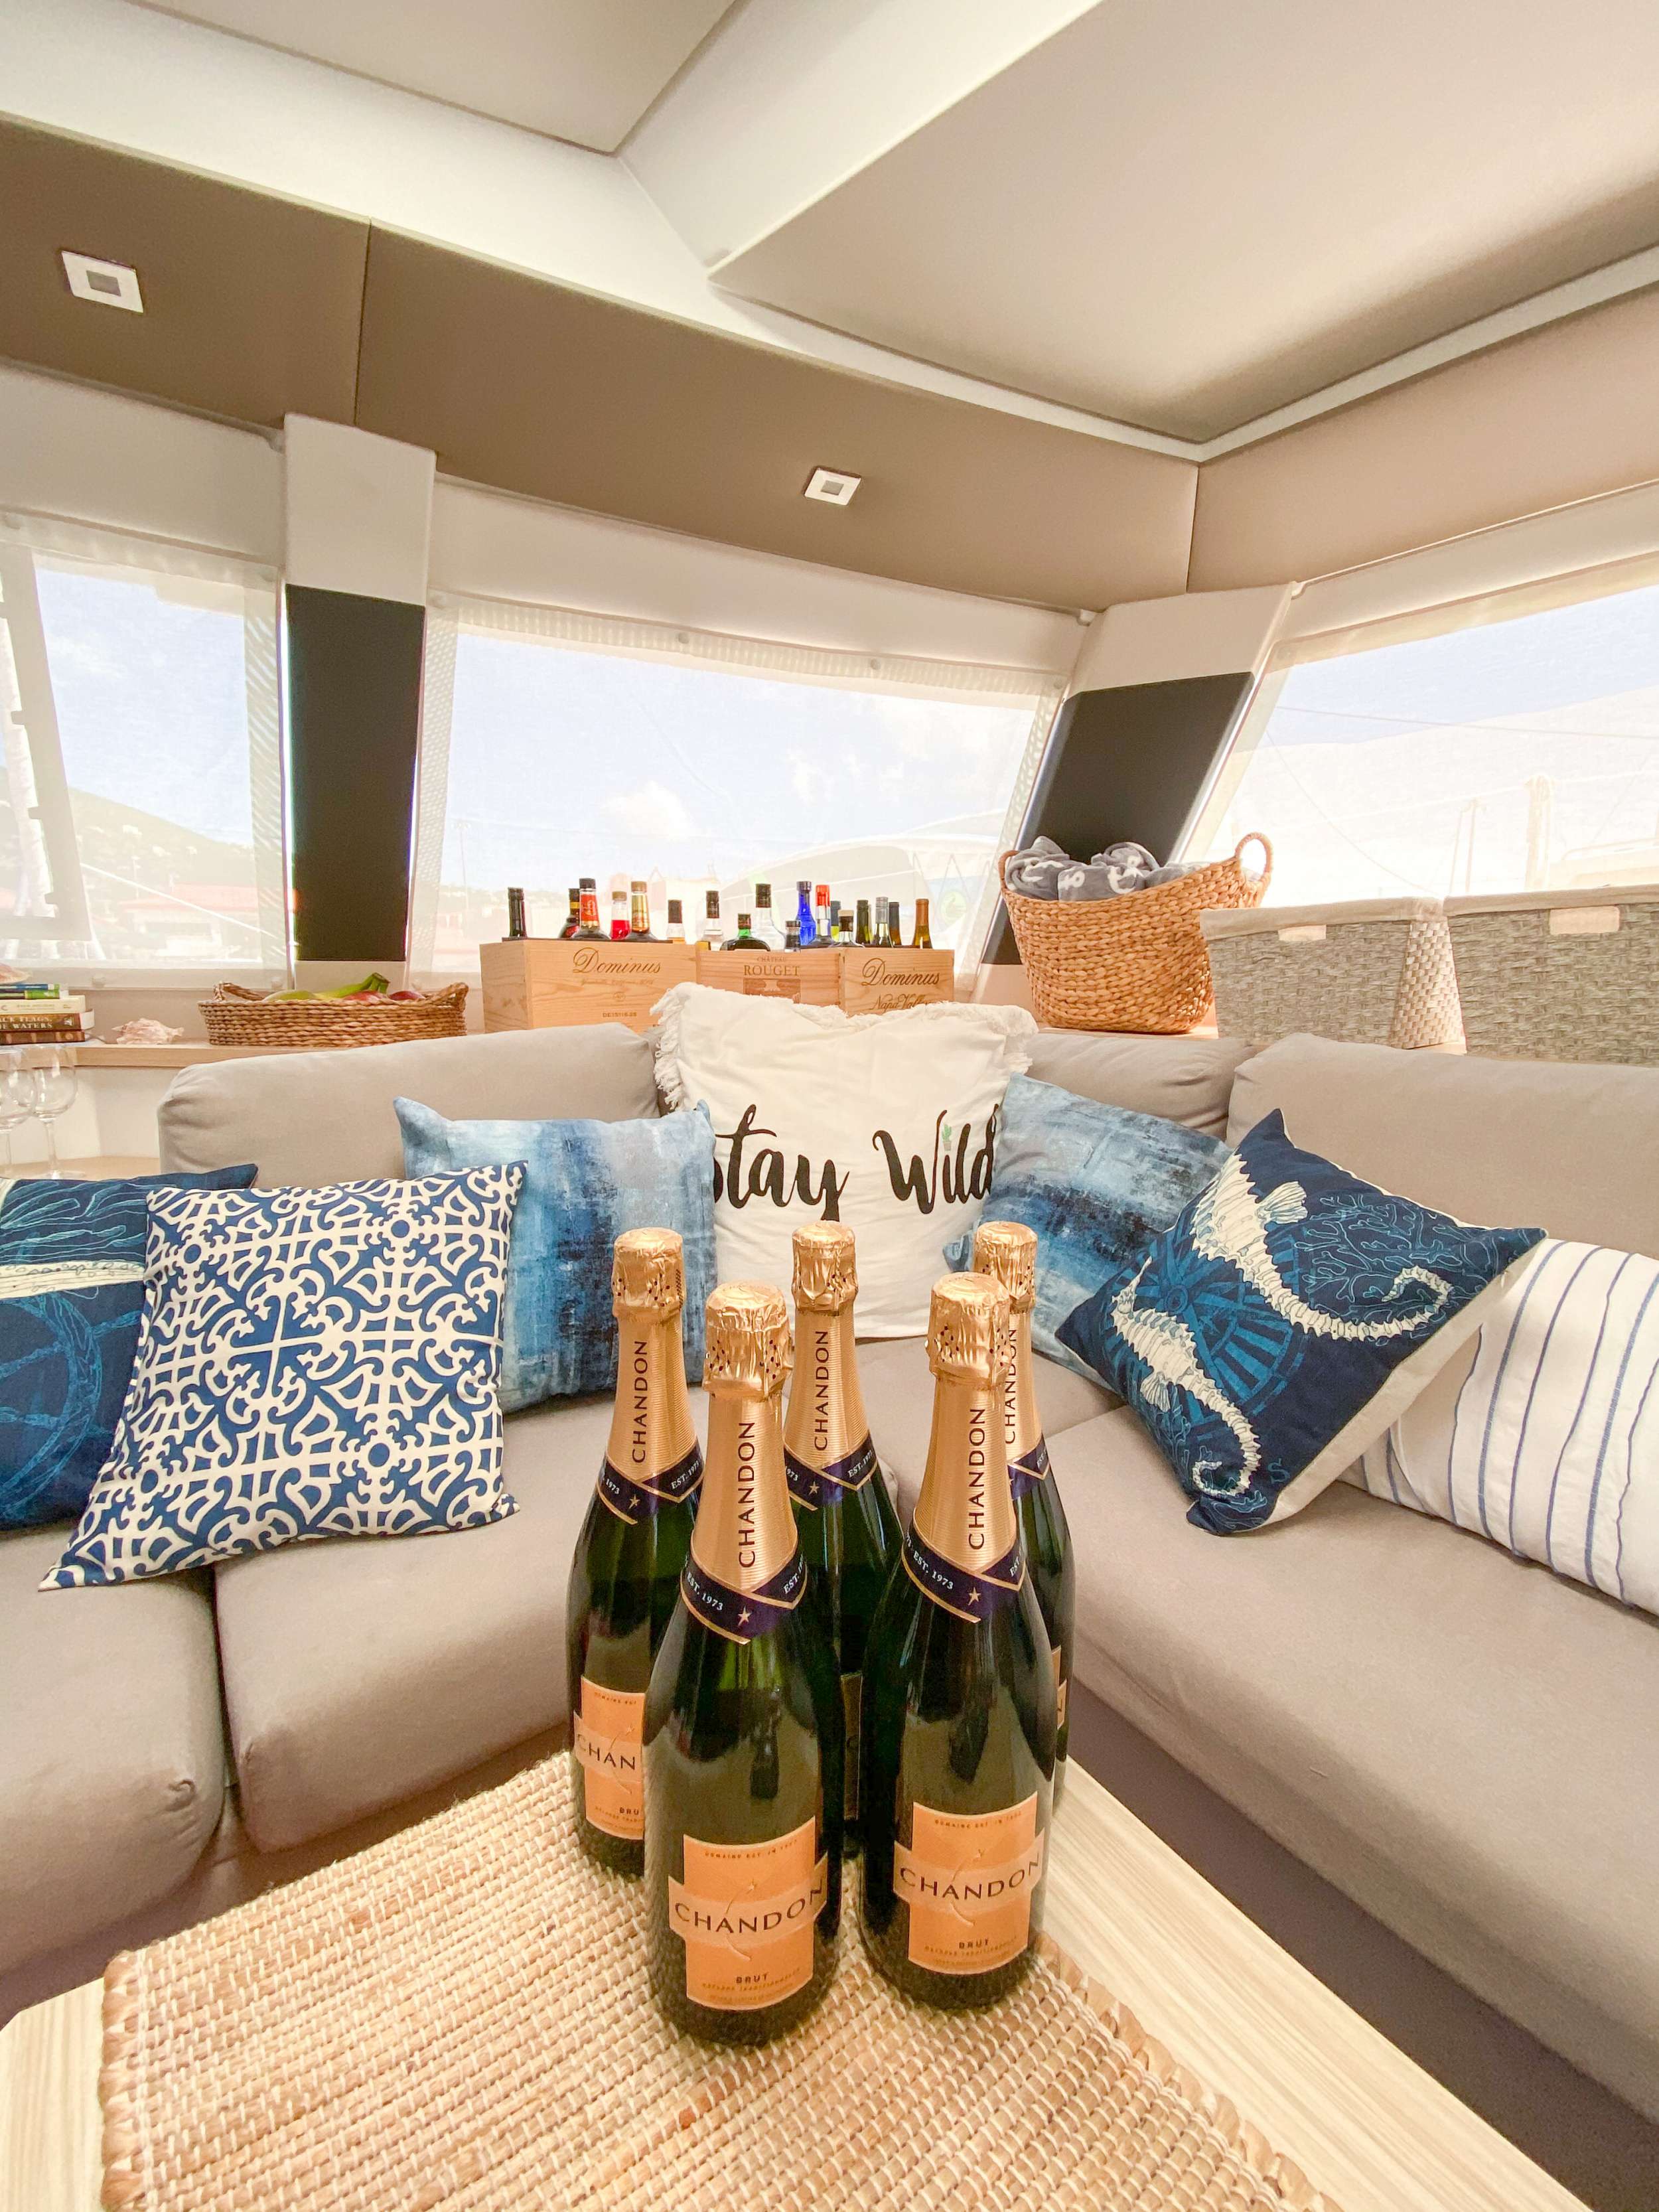 Sol Mates Yacht Charter - Champagne welcome!